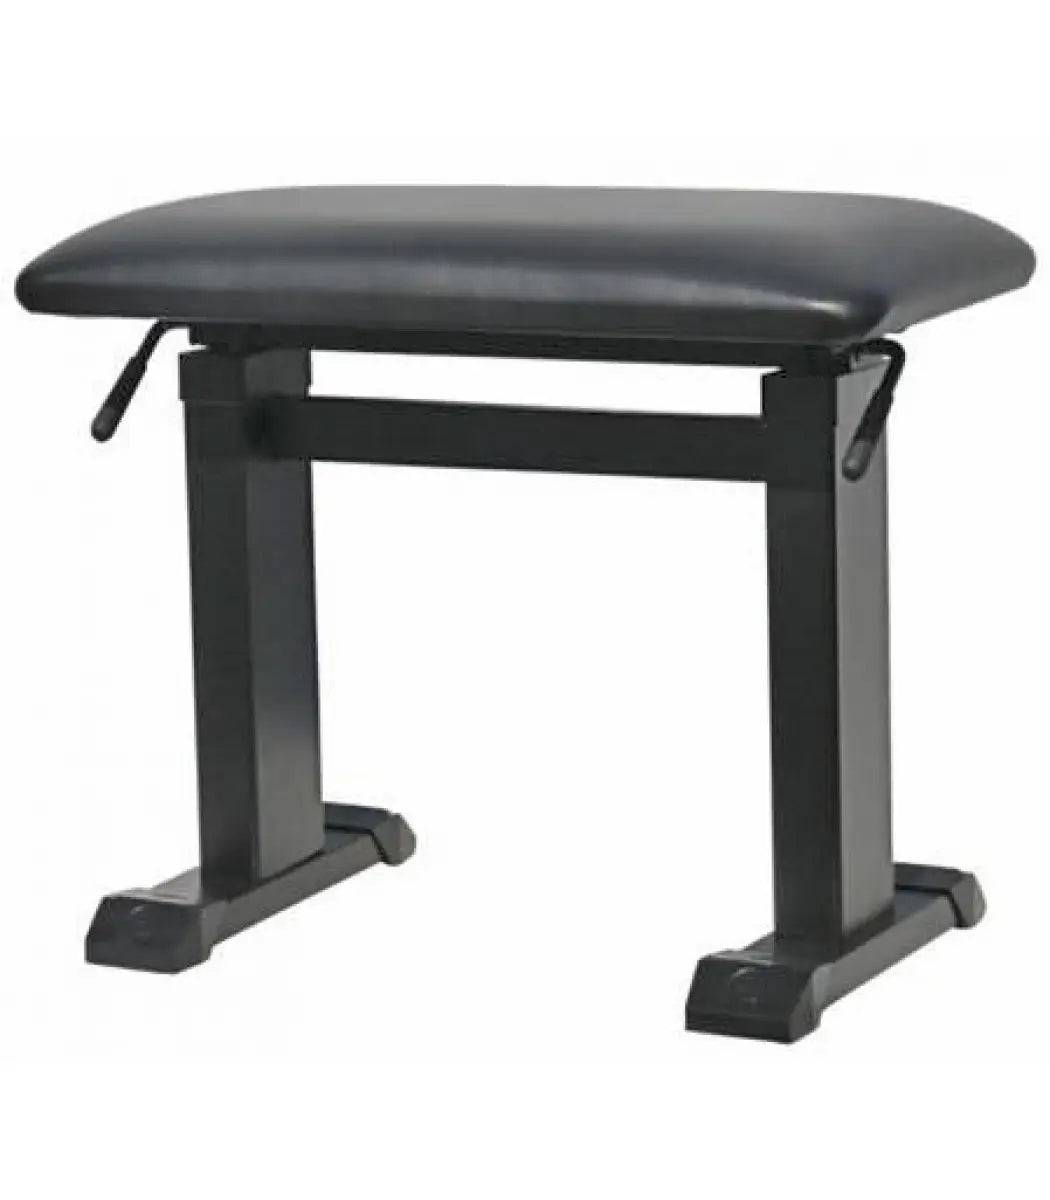 XTREME EASY-LIFT HYDRAULIC PIANO BENCH - BLACK - Joondalup Music Centre